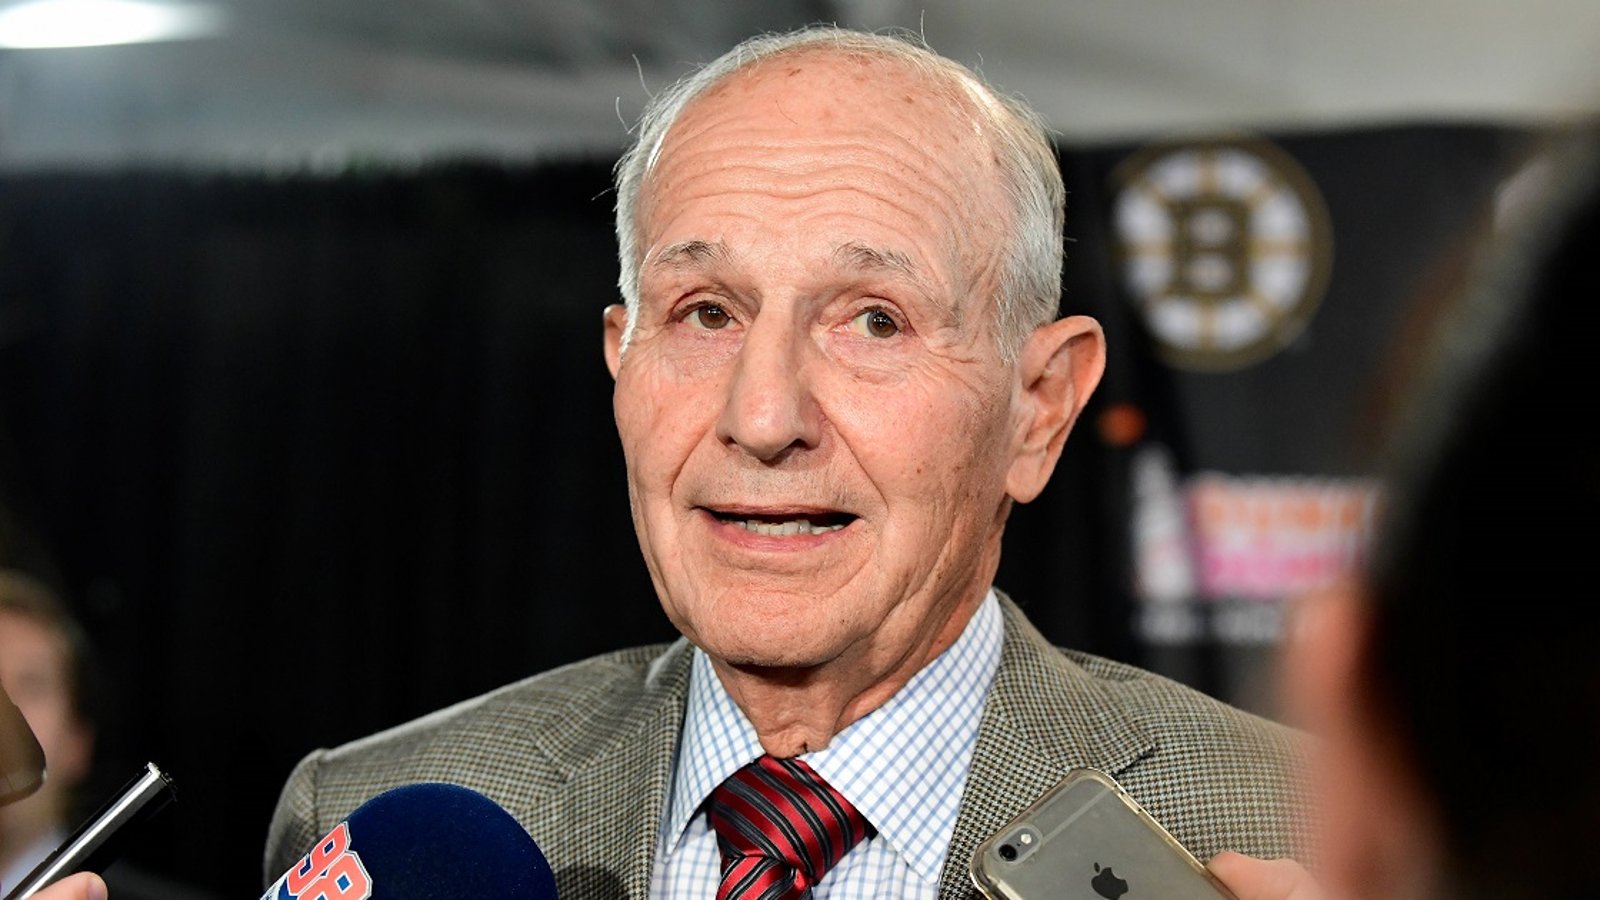 Rumor: Bruins owner Jeremy Jacobs behind the delays to the NHL season.